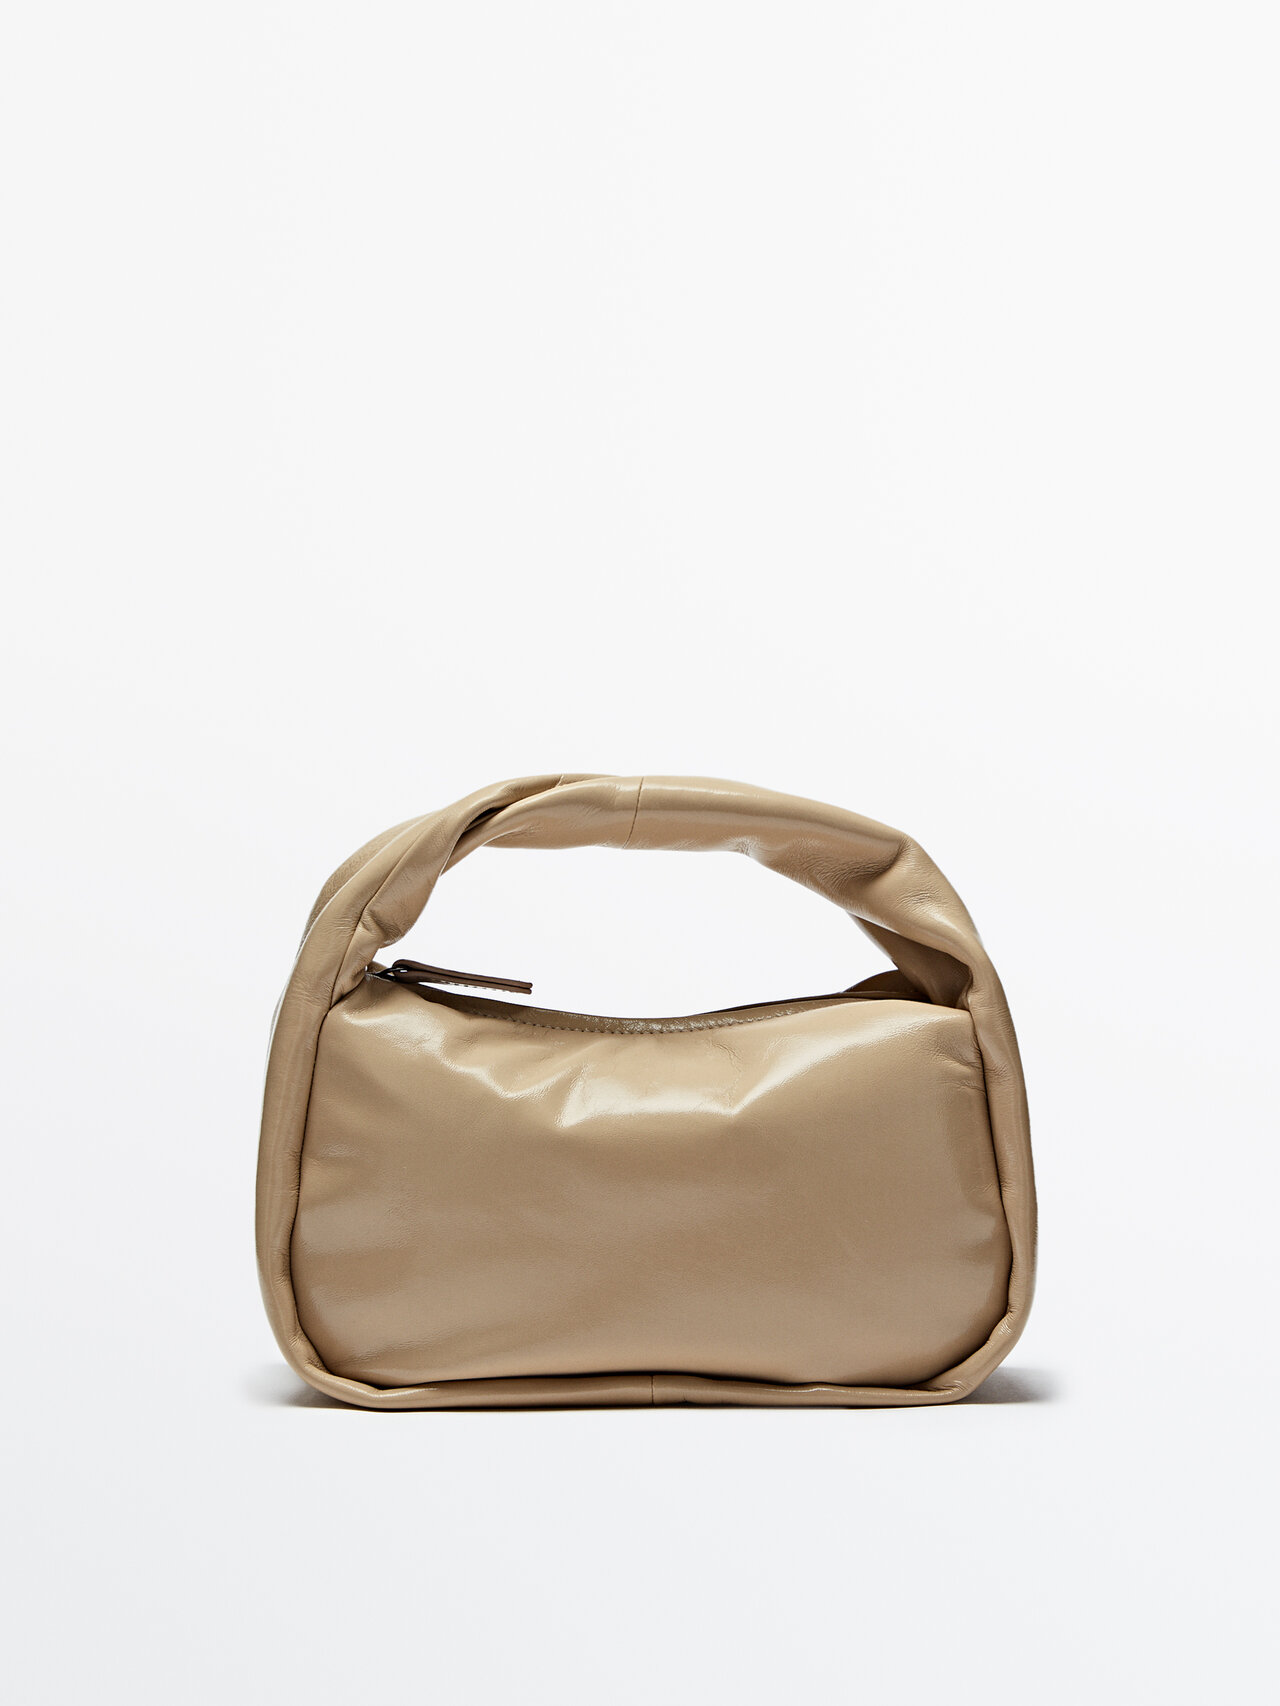 Massimo Dutti Leather Bucket Bag With A Crackled Finish In Beige